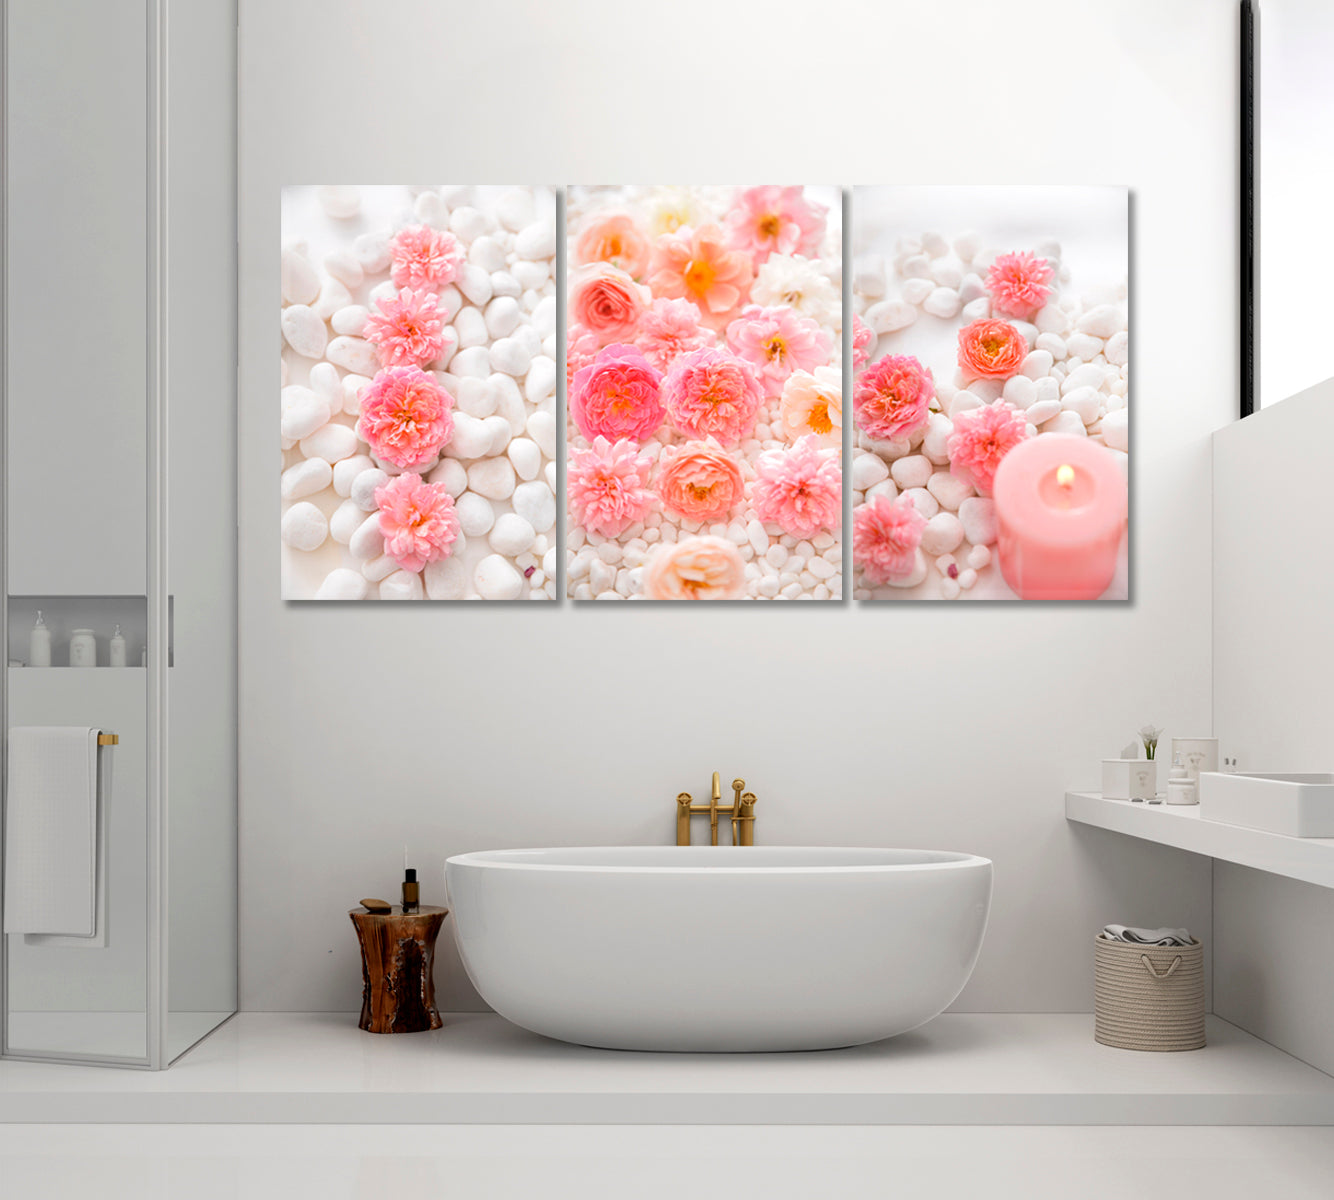 Set of 3 Spa Stones and Pink Roses Canvas Print ArtLexy 3 Panels 48”x24” inches 